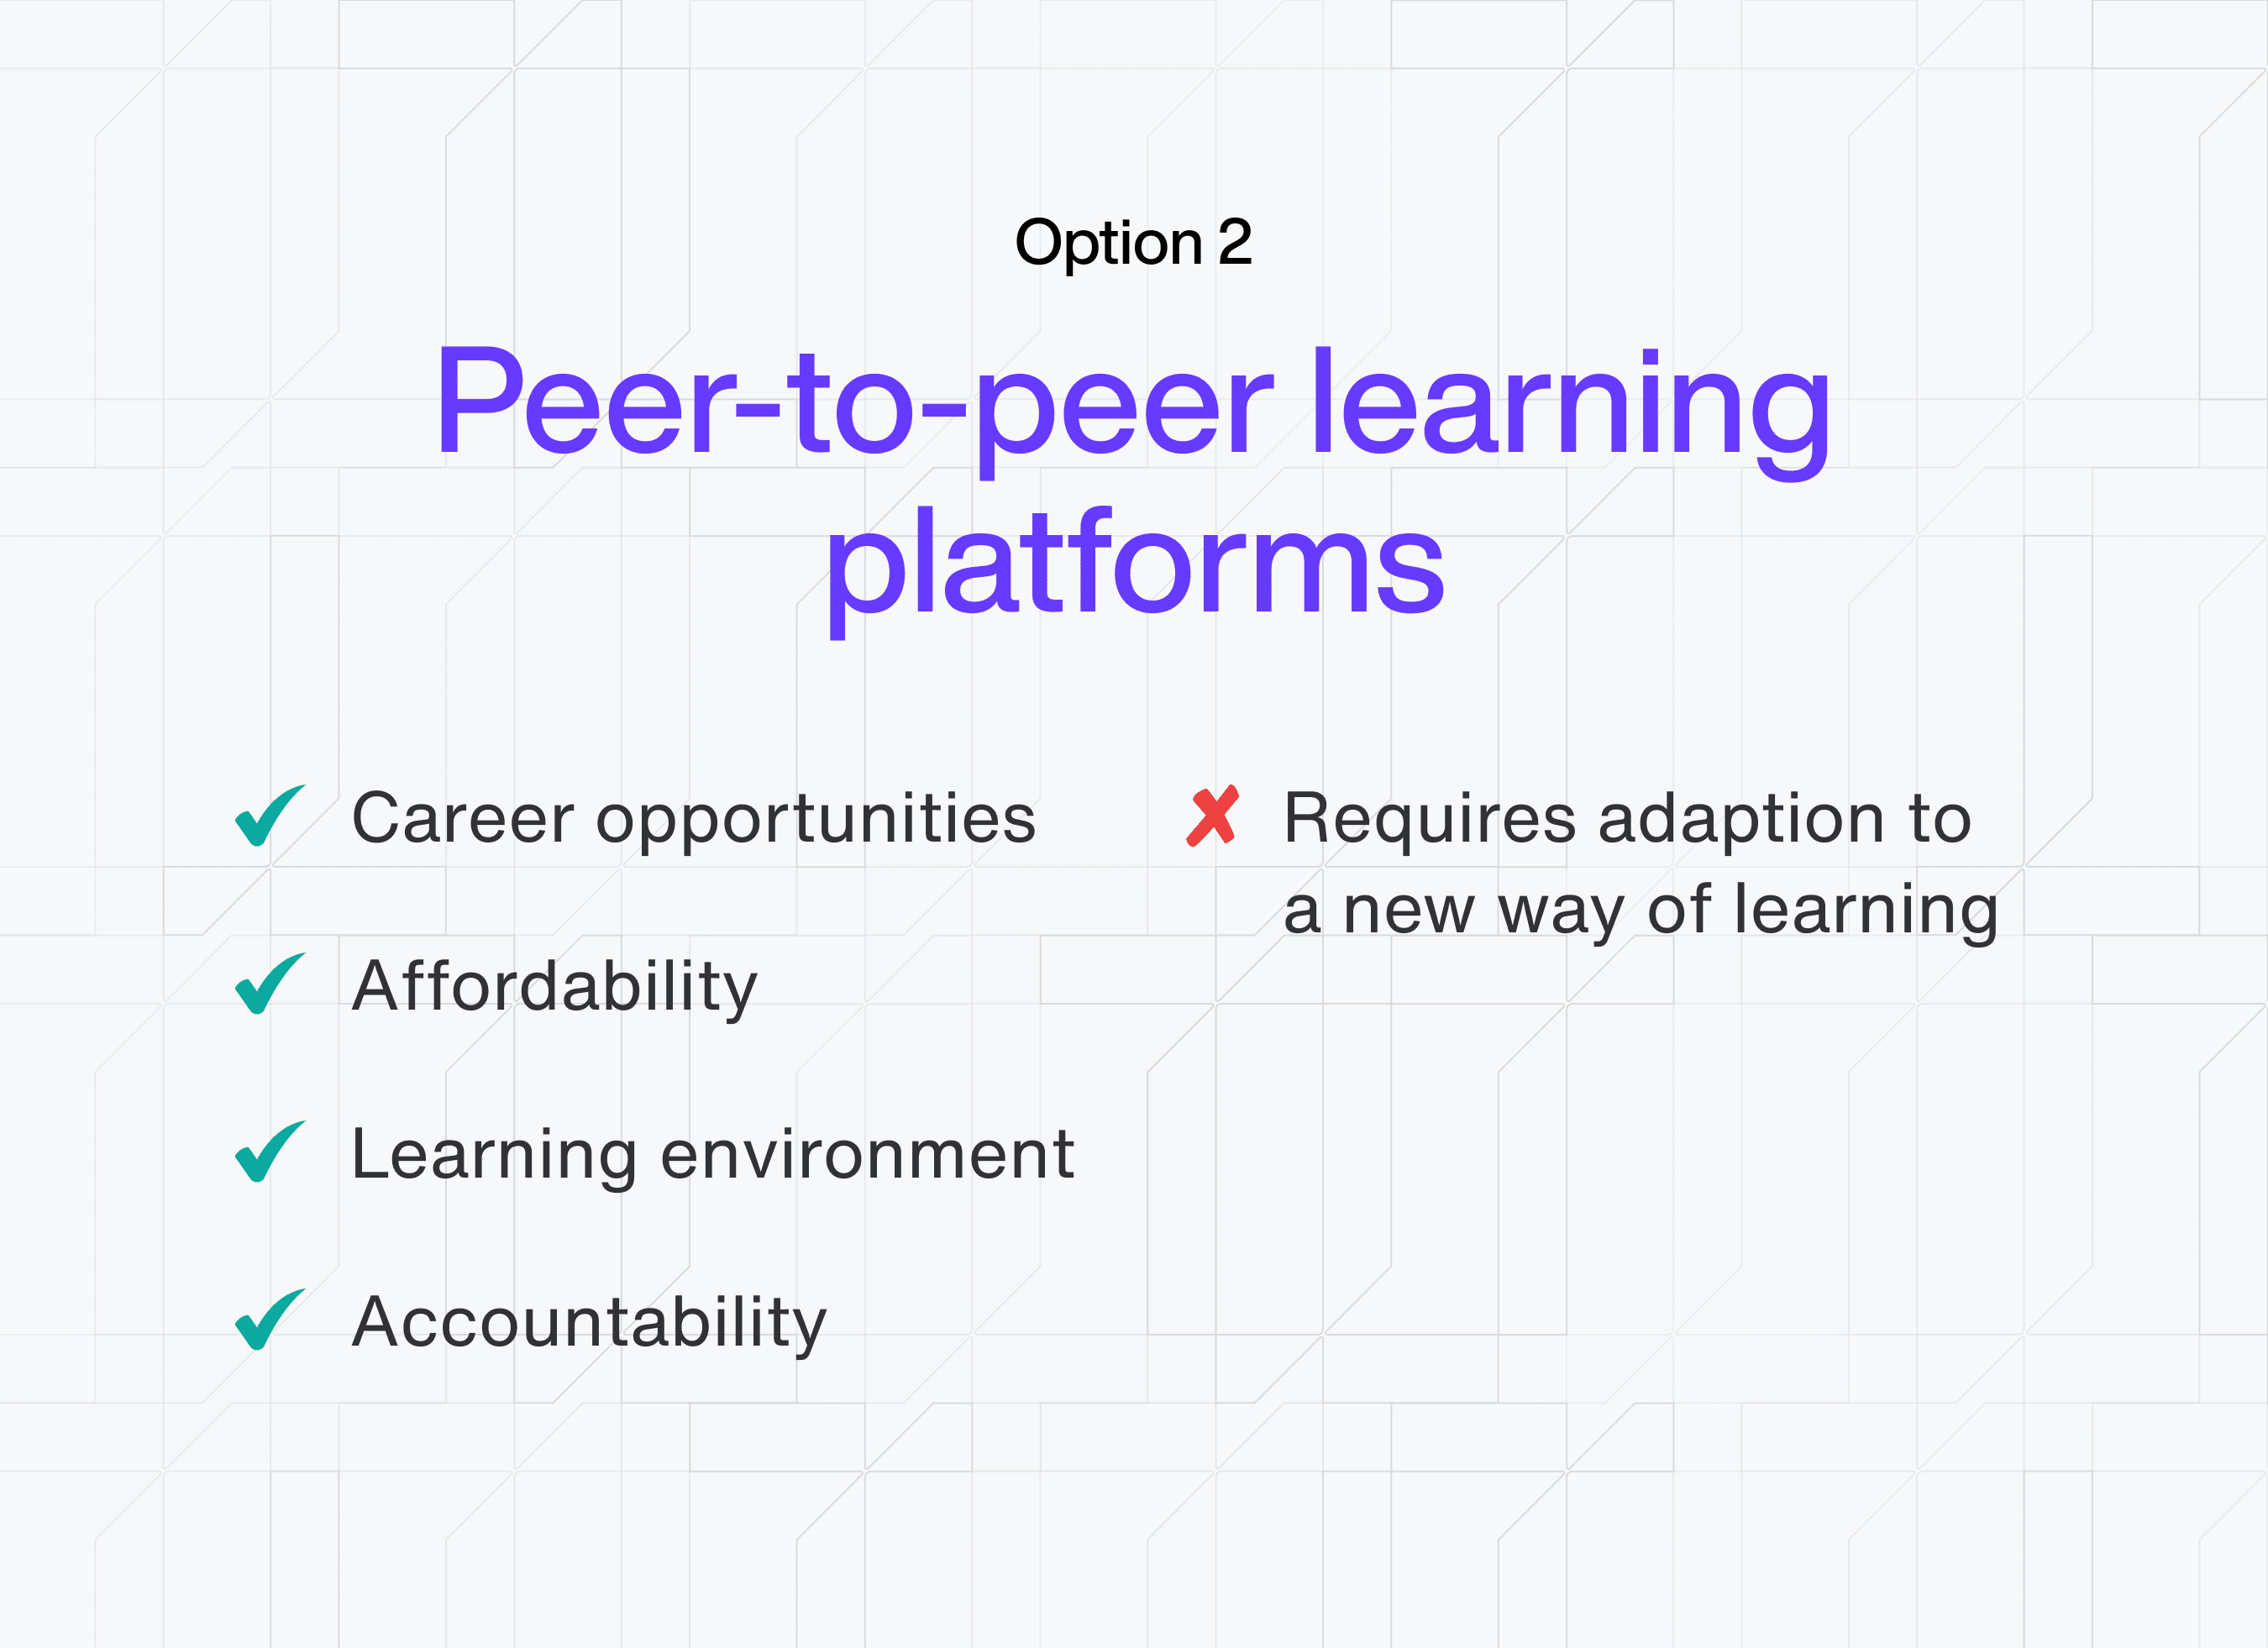 Peer-to-peer learning platform pros and cons